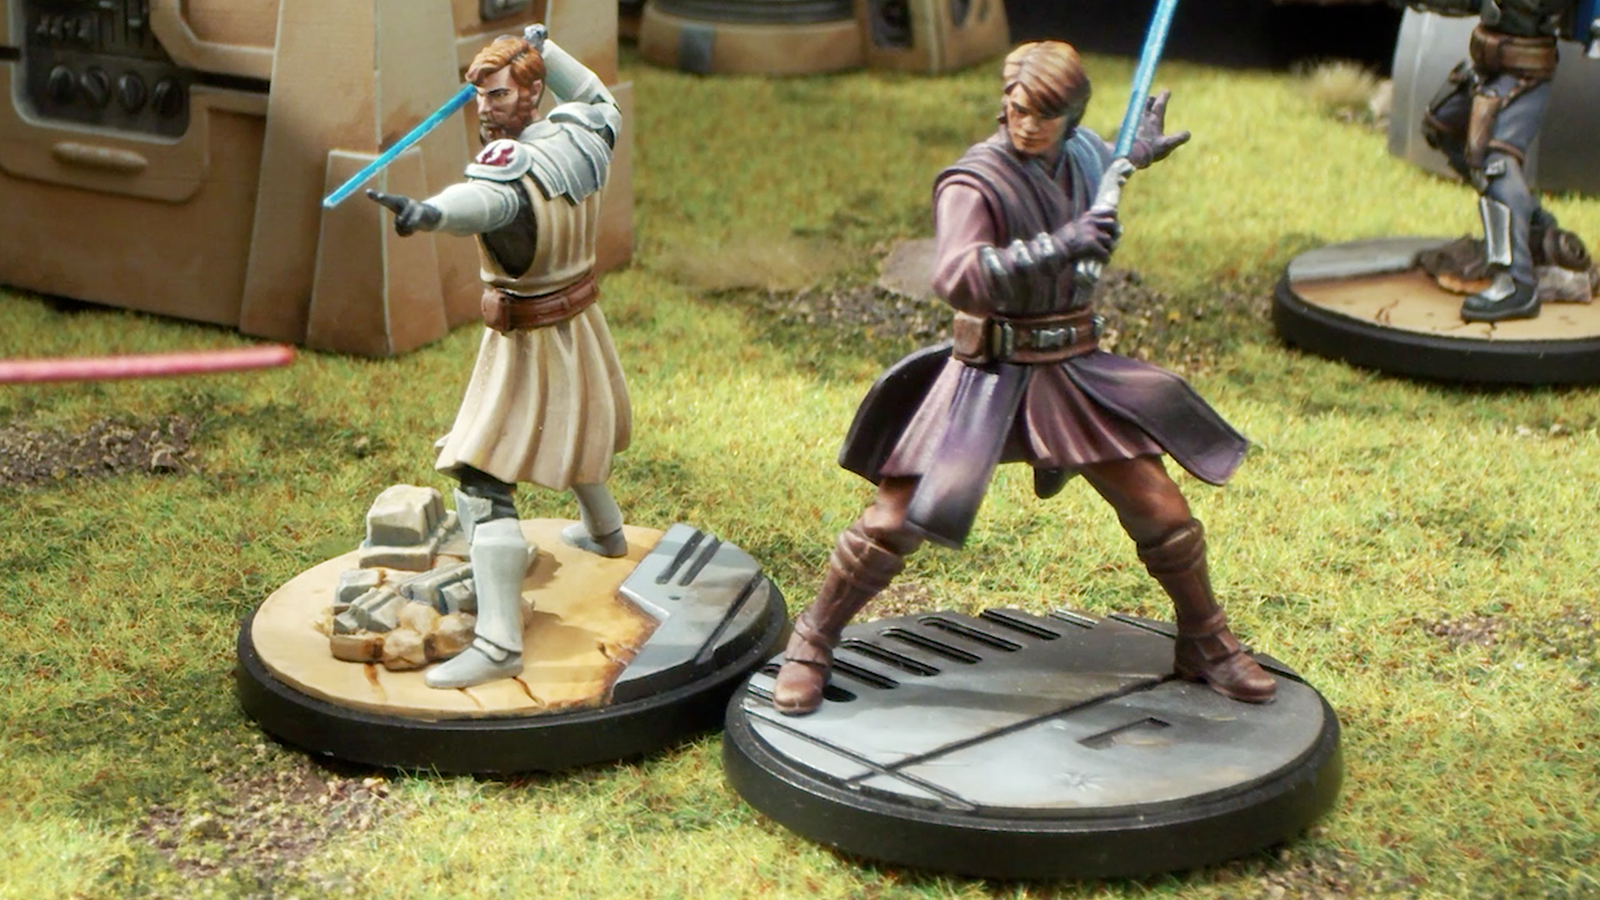 BREAKING NEWS! – Moff Gideon and Dark Troopers Coming EARLY 2023 for Star  Wars: Legion 